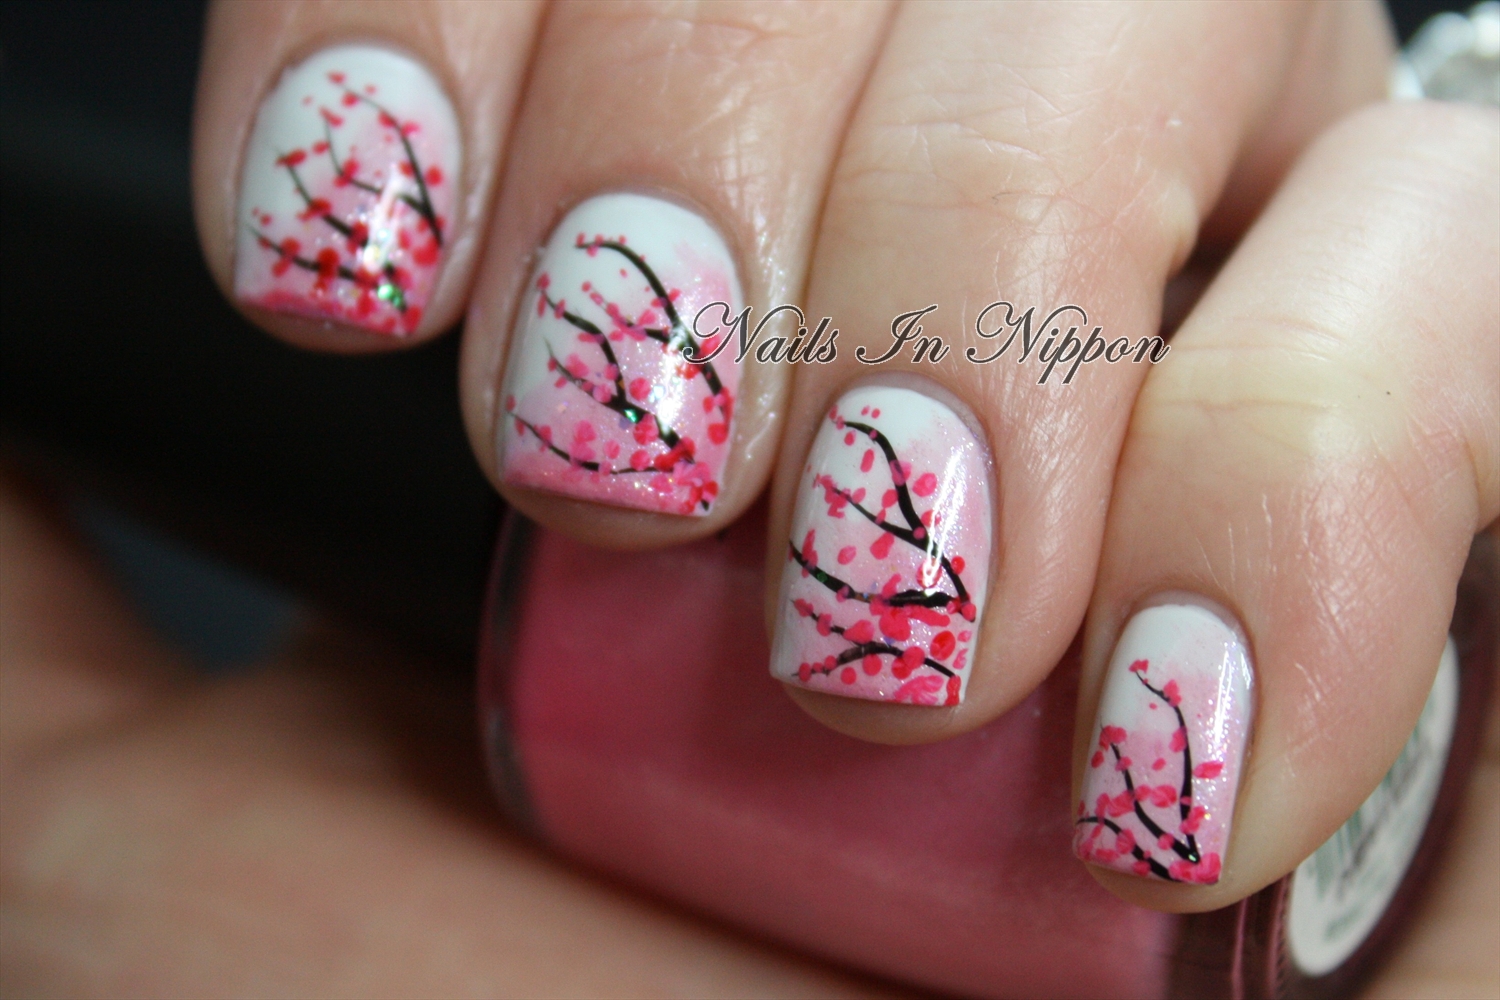 Cherry Blossom Nail Art Tutorial in Arbroath - wide 6